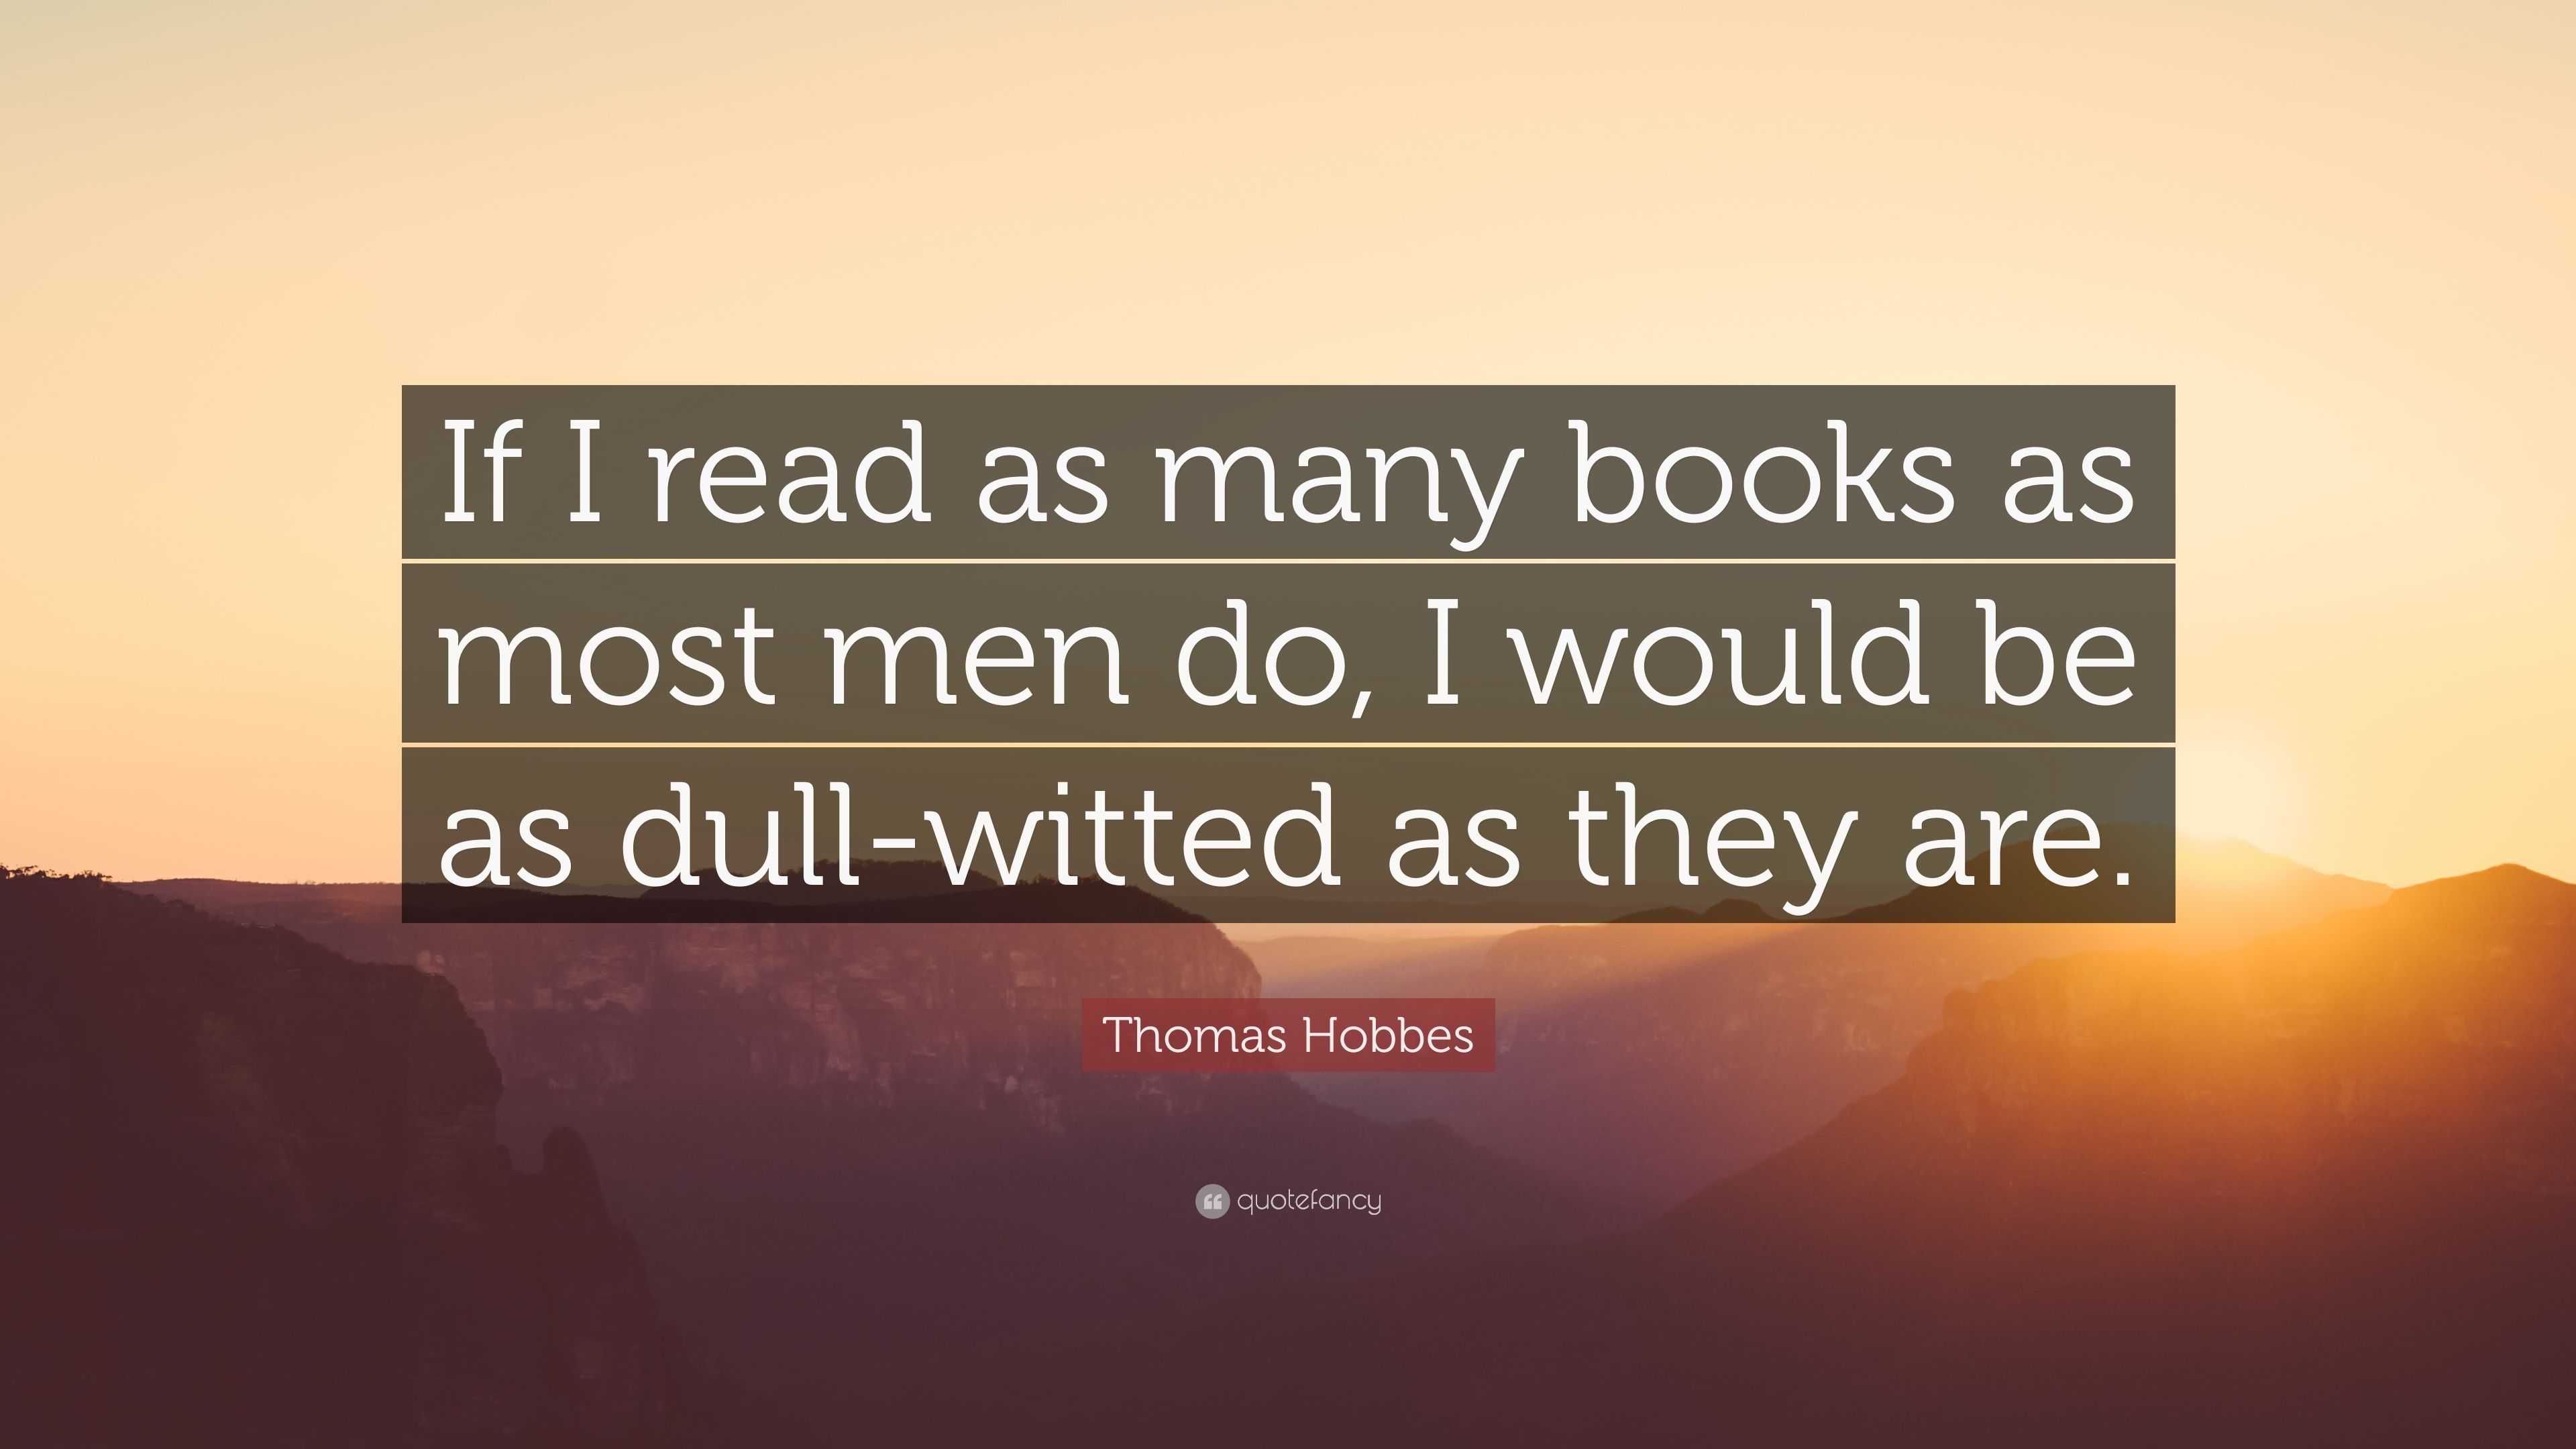 Thomas Hobbes Quote: “If I read as many books as most men do, I would ...